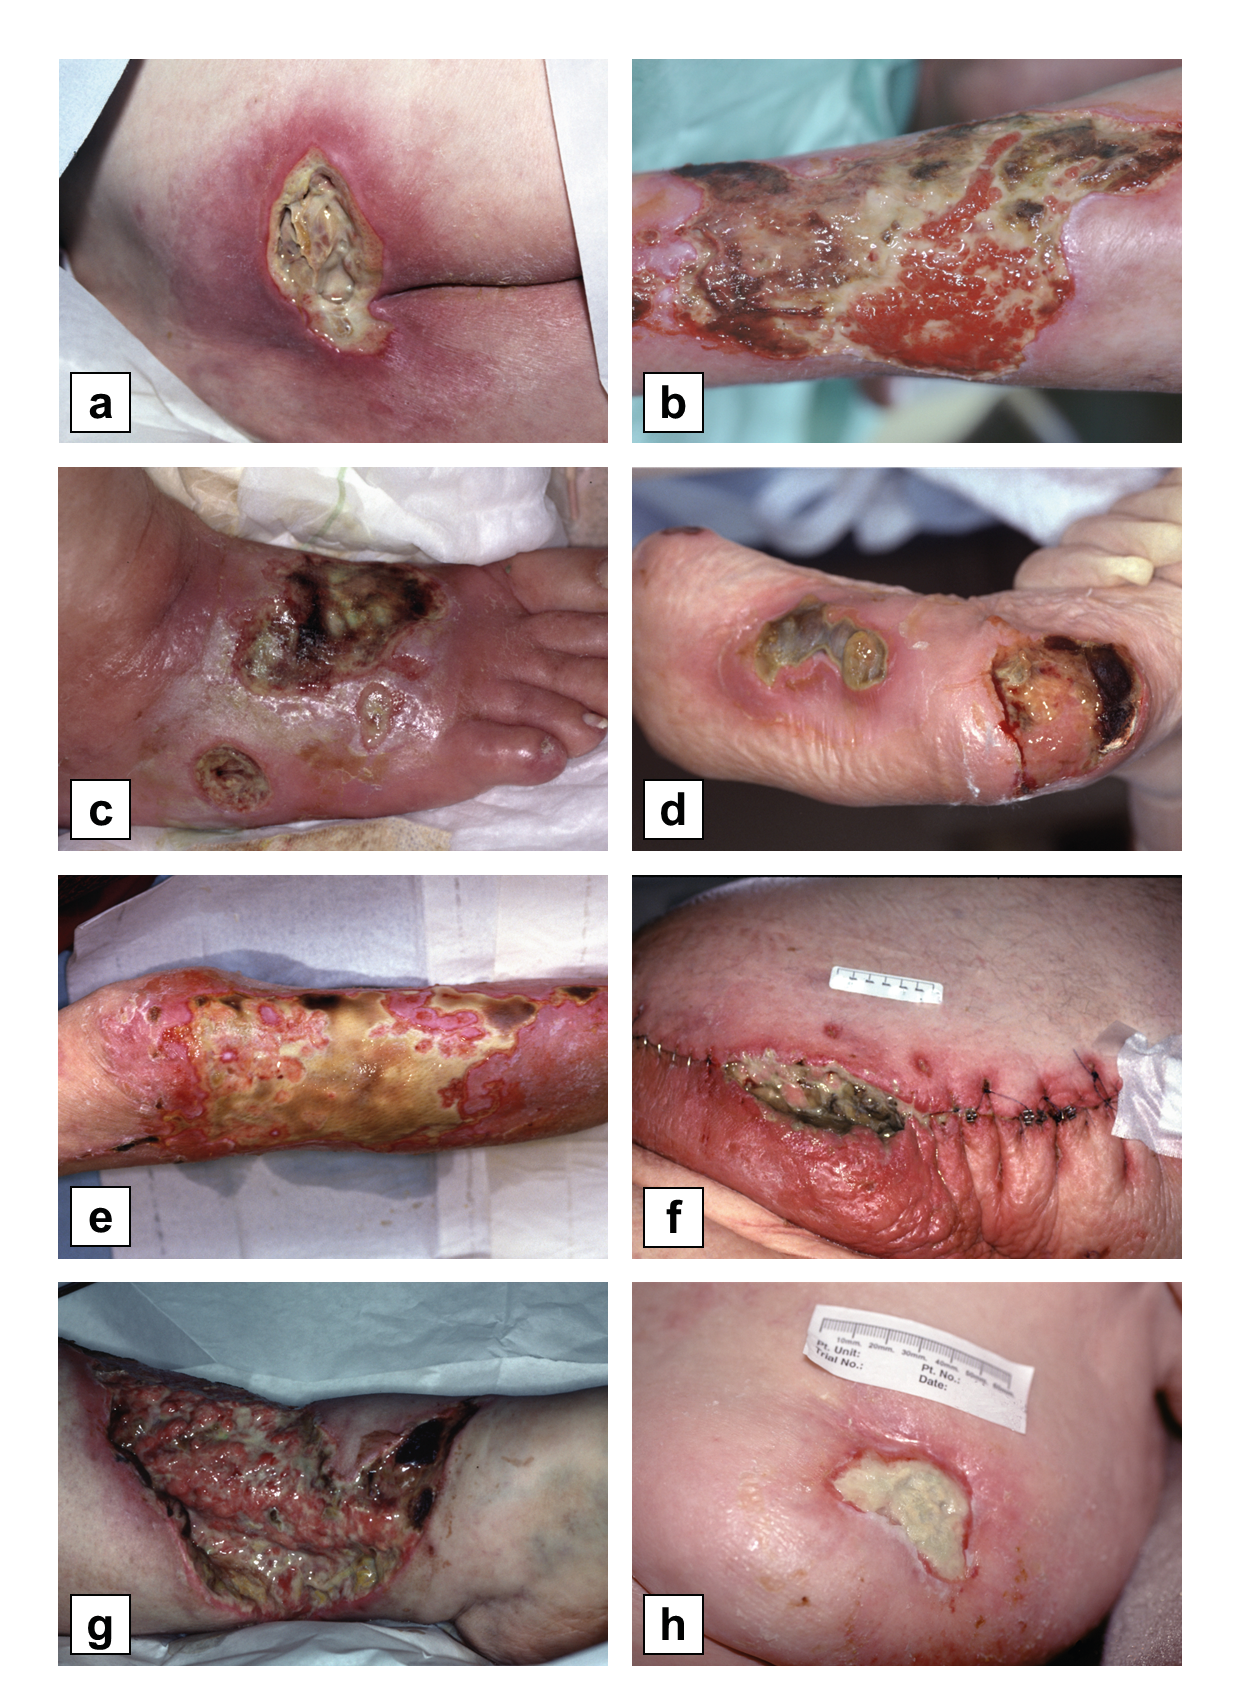 A Complete Guide to Maggot Therapy - 3. Wound Aetiologies, Patient